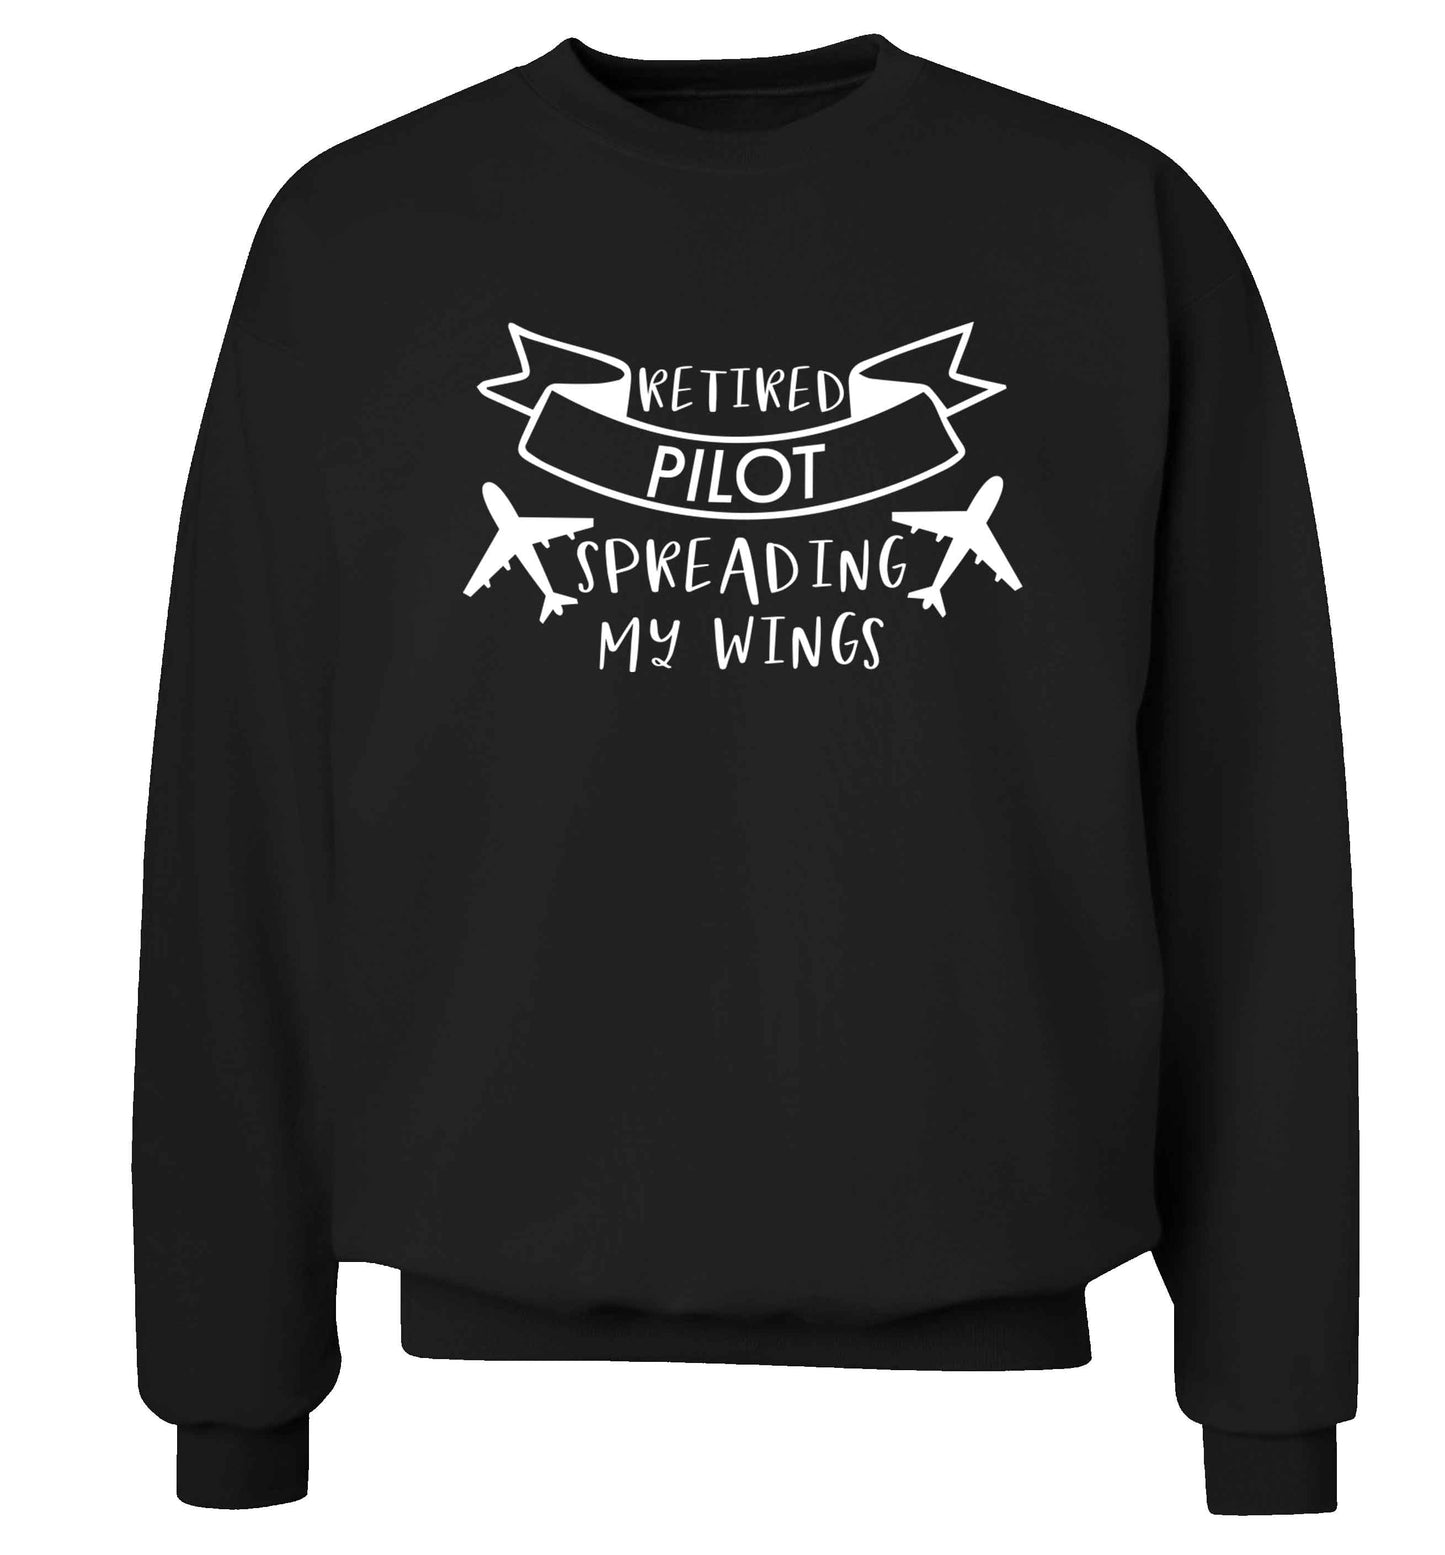 Retired pilot spreading my wings Adult's unisex black Sweater 2XL